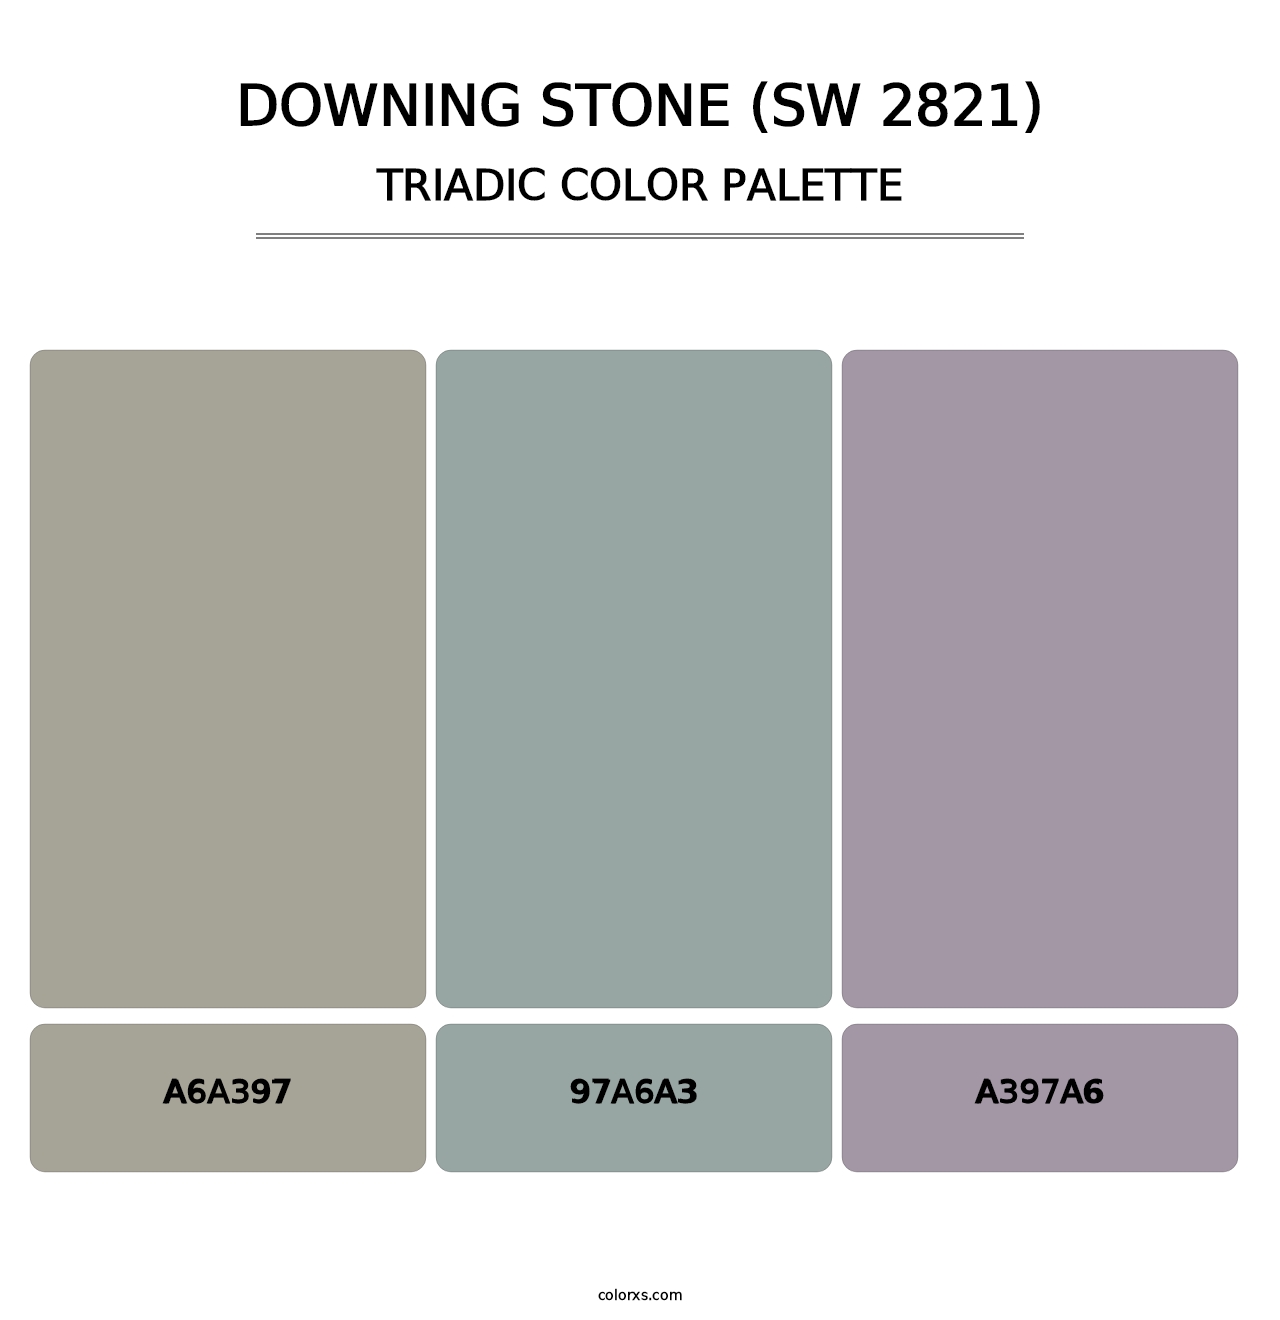 Downing Stone (SW 2821) - Triadic Color Palette